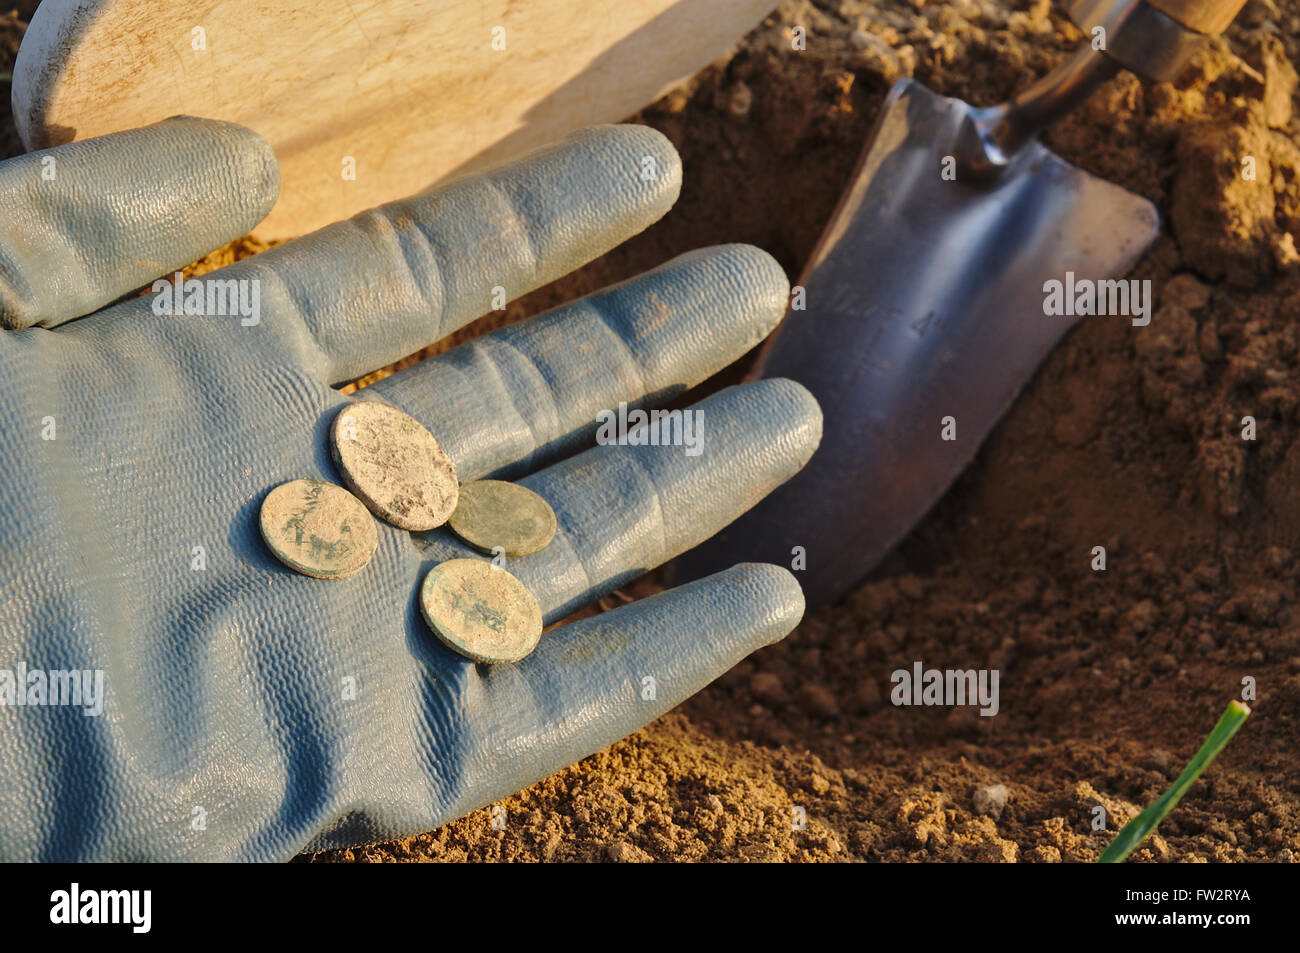 Metal detecting and treasure hunting. Metal detector, spade and gloves. Sports and hobbies theme Stock Photo